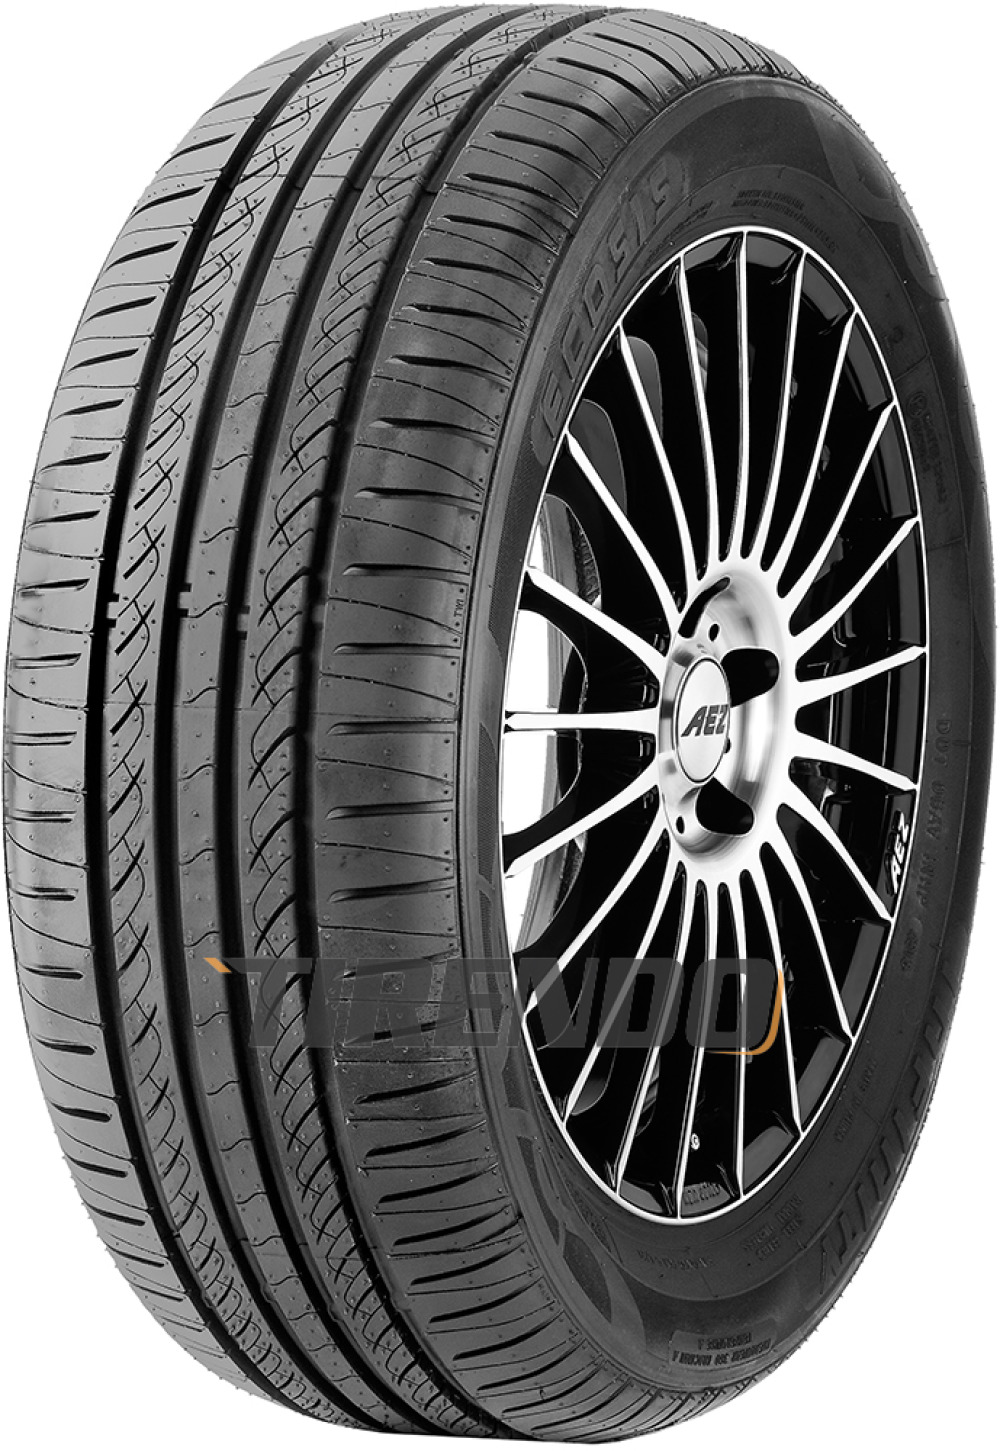 INFINITY ECOSIS 185/55 R 14 80H